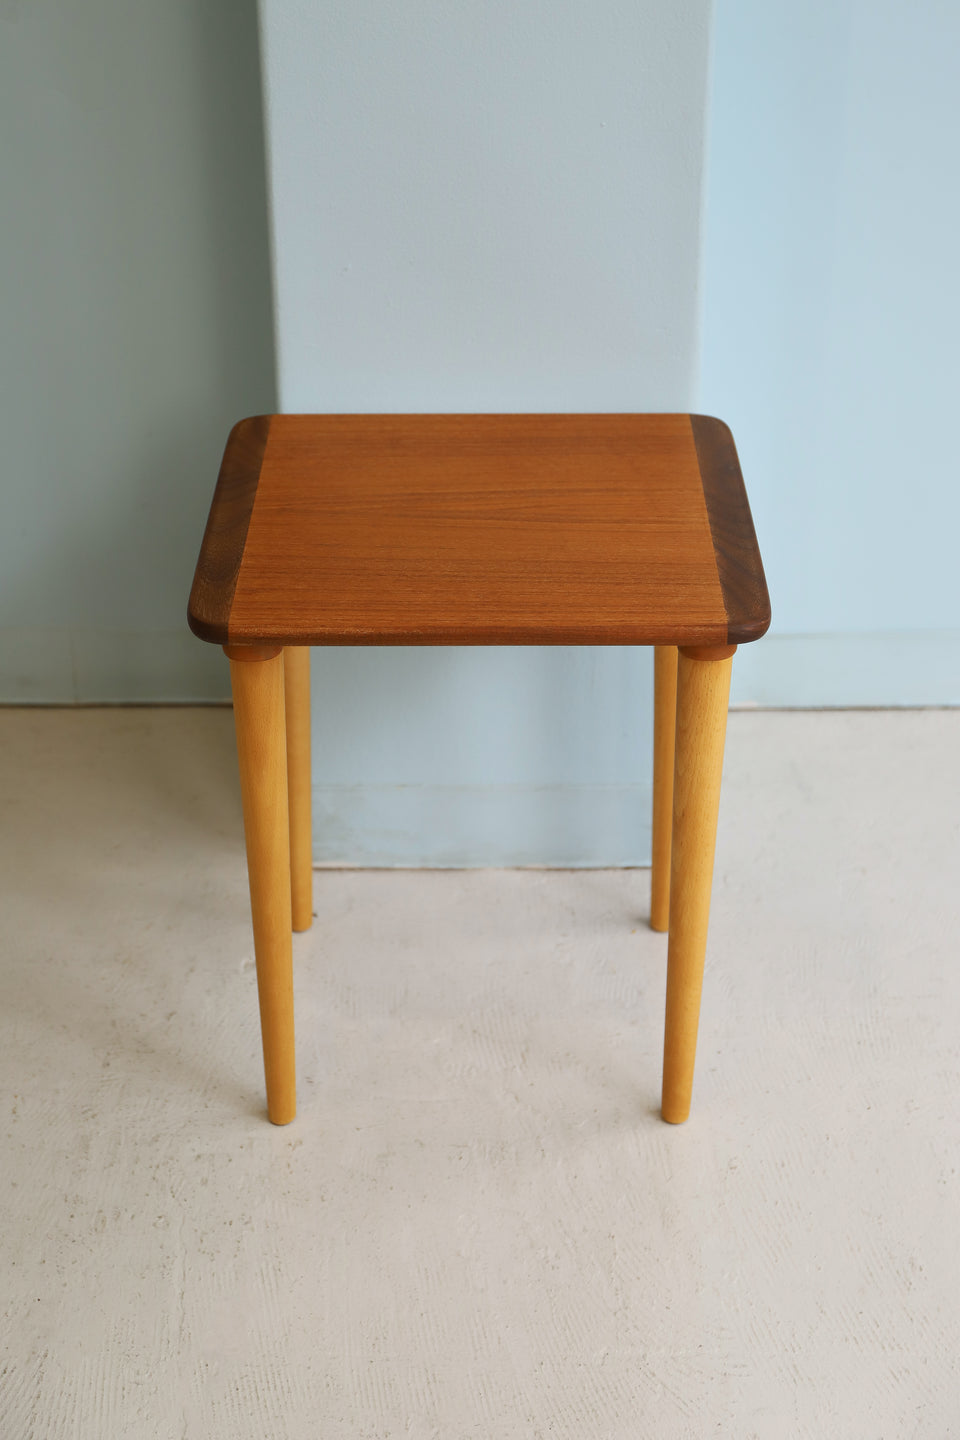 Small Side Table Danish Vintage/デンマークヴィンテージ サイドテーブル チーク材 北欧家具